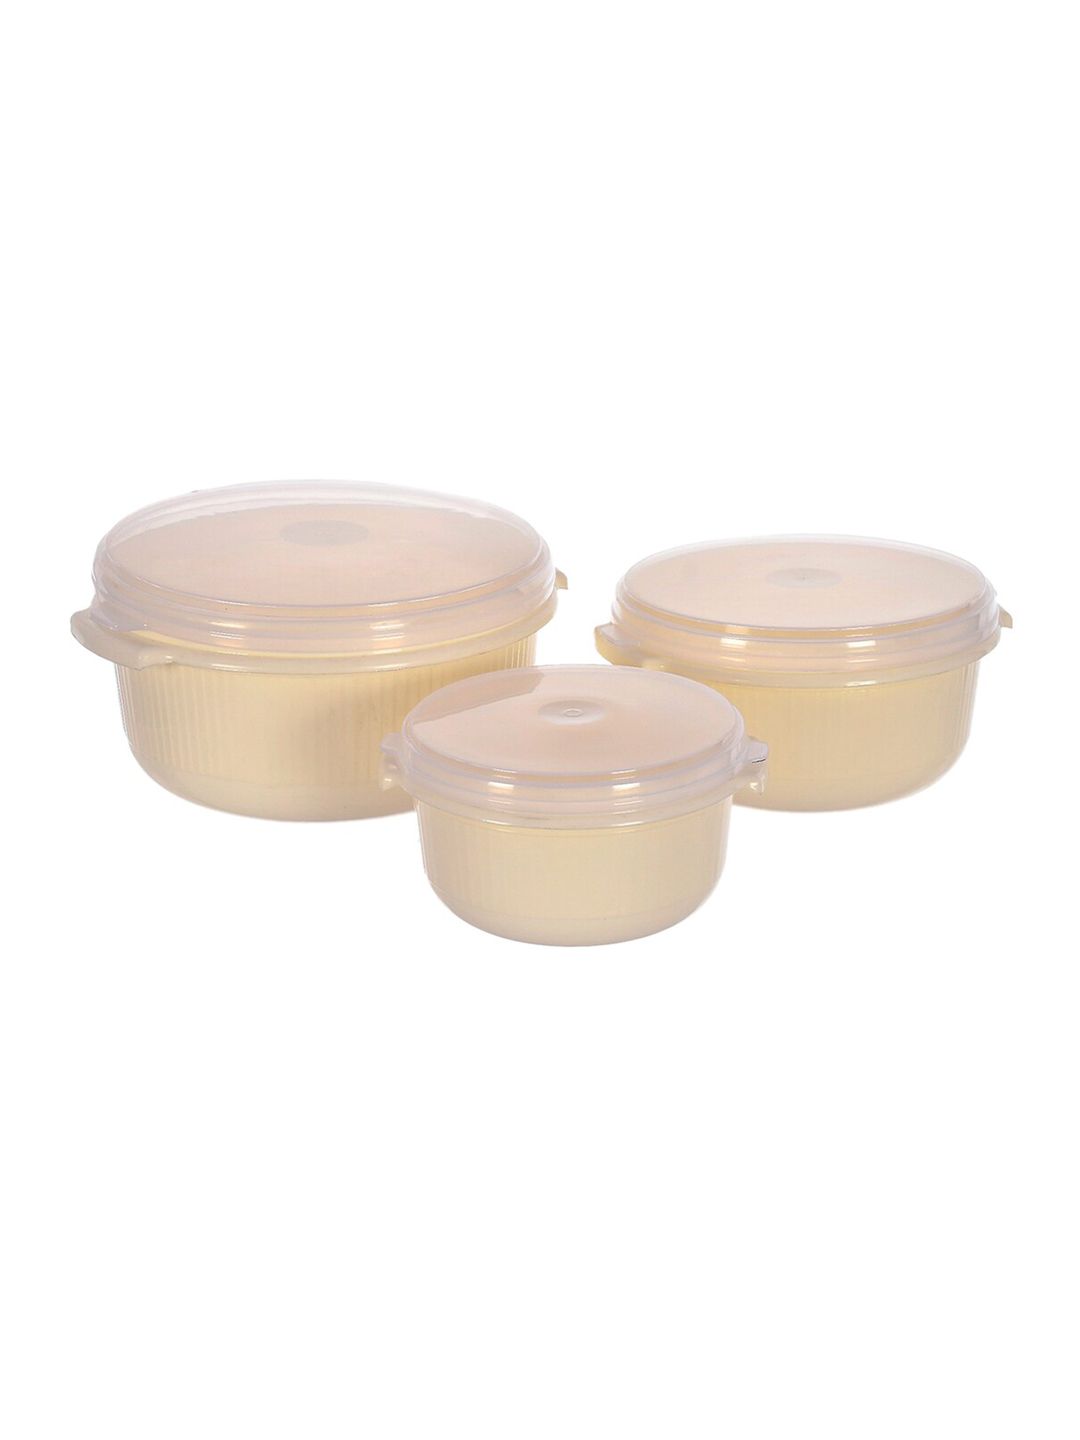 Kuber Industries Set Of 3 Cream Storage Containers With Lid Price in India